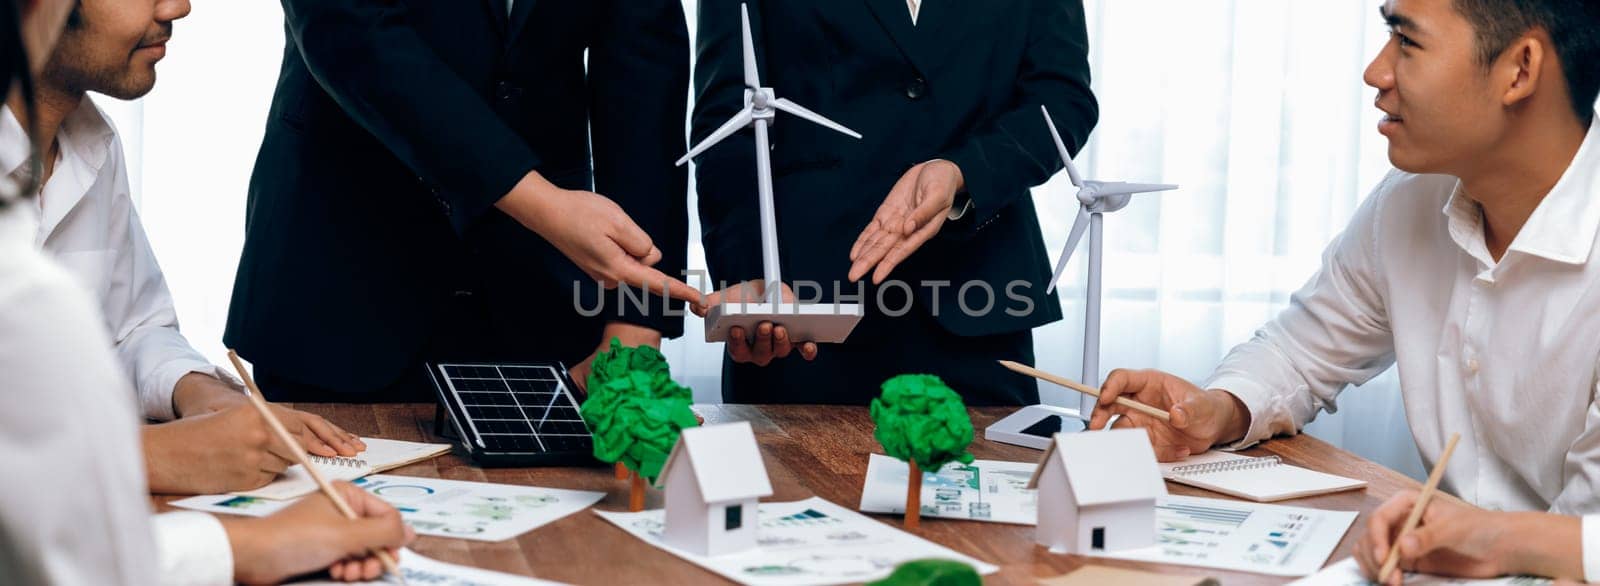 Green energy business company meeting with business people planning and discuss marketing of sustainable and renewable clean energy product with solar cell and wind turbine generator. Trailblazing